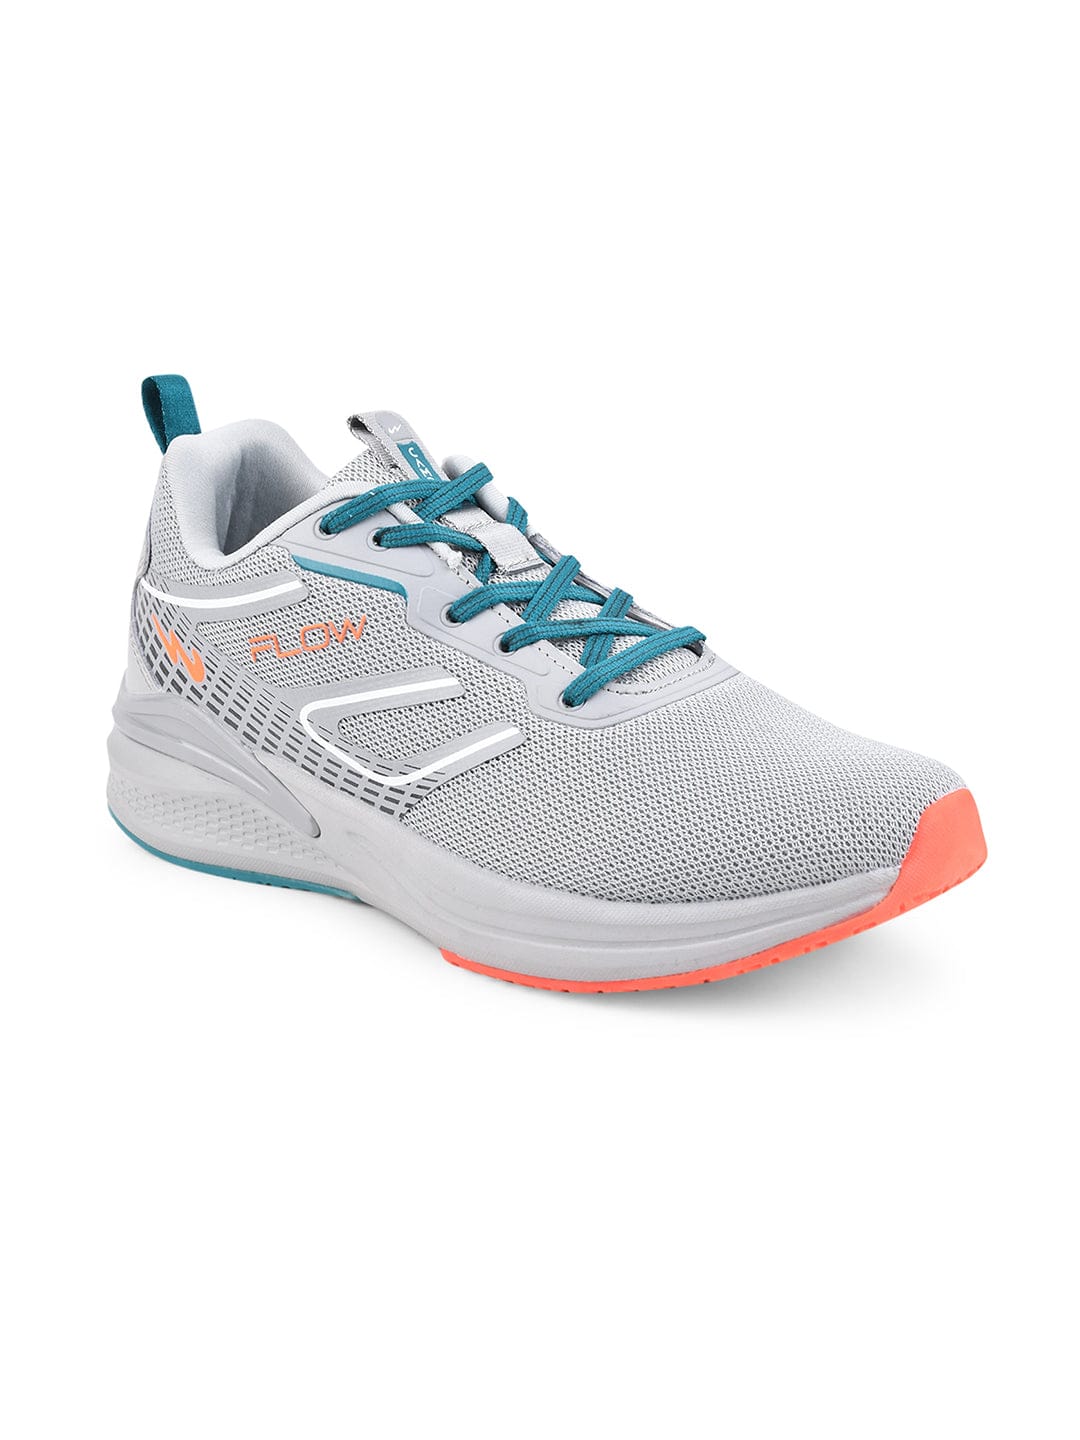 Buy Running Shoes For Men: Flow-Pro-L-Gry-F-Org | Campus Shoes